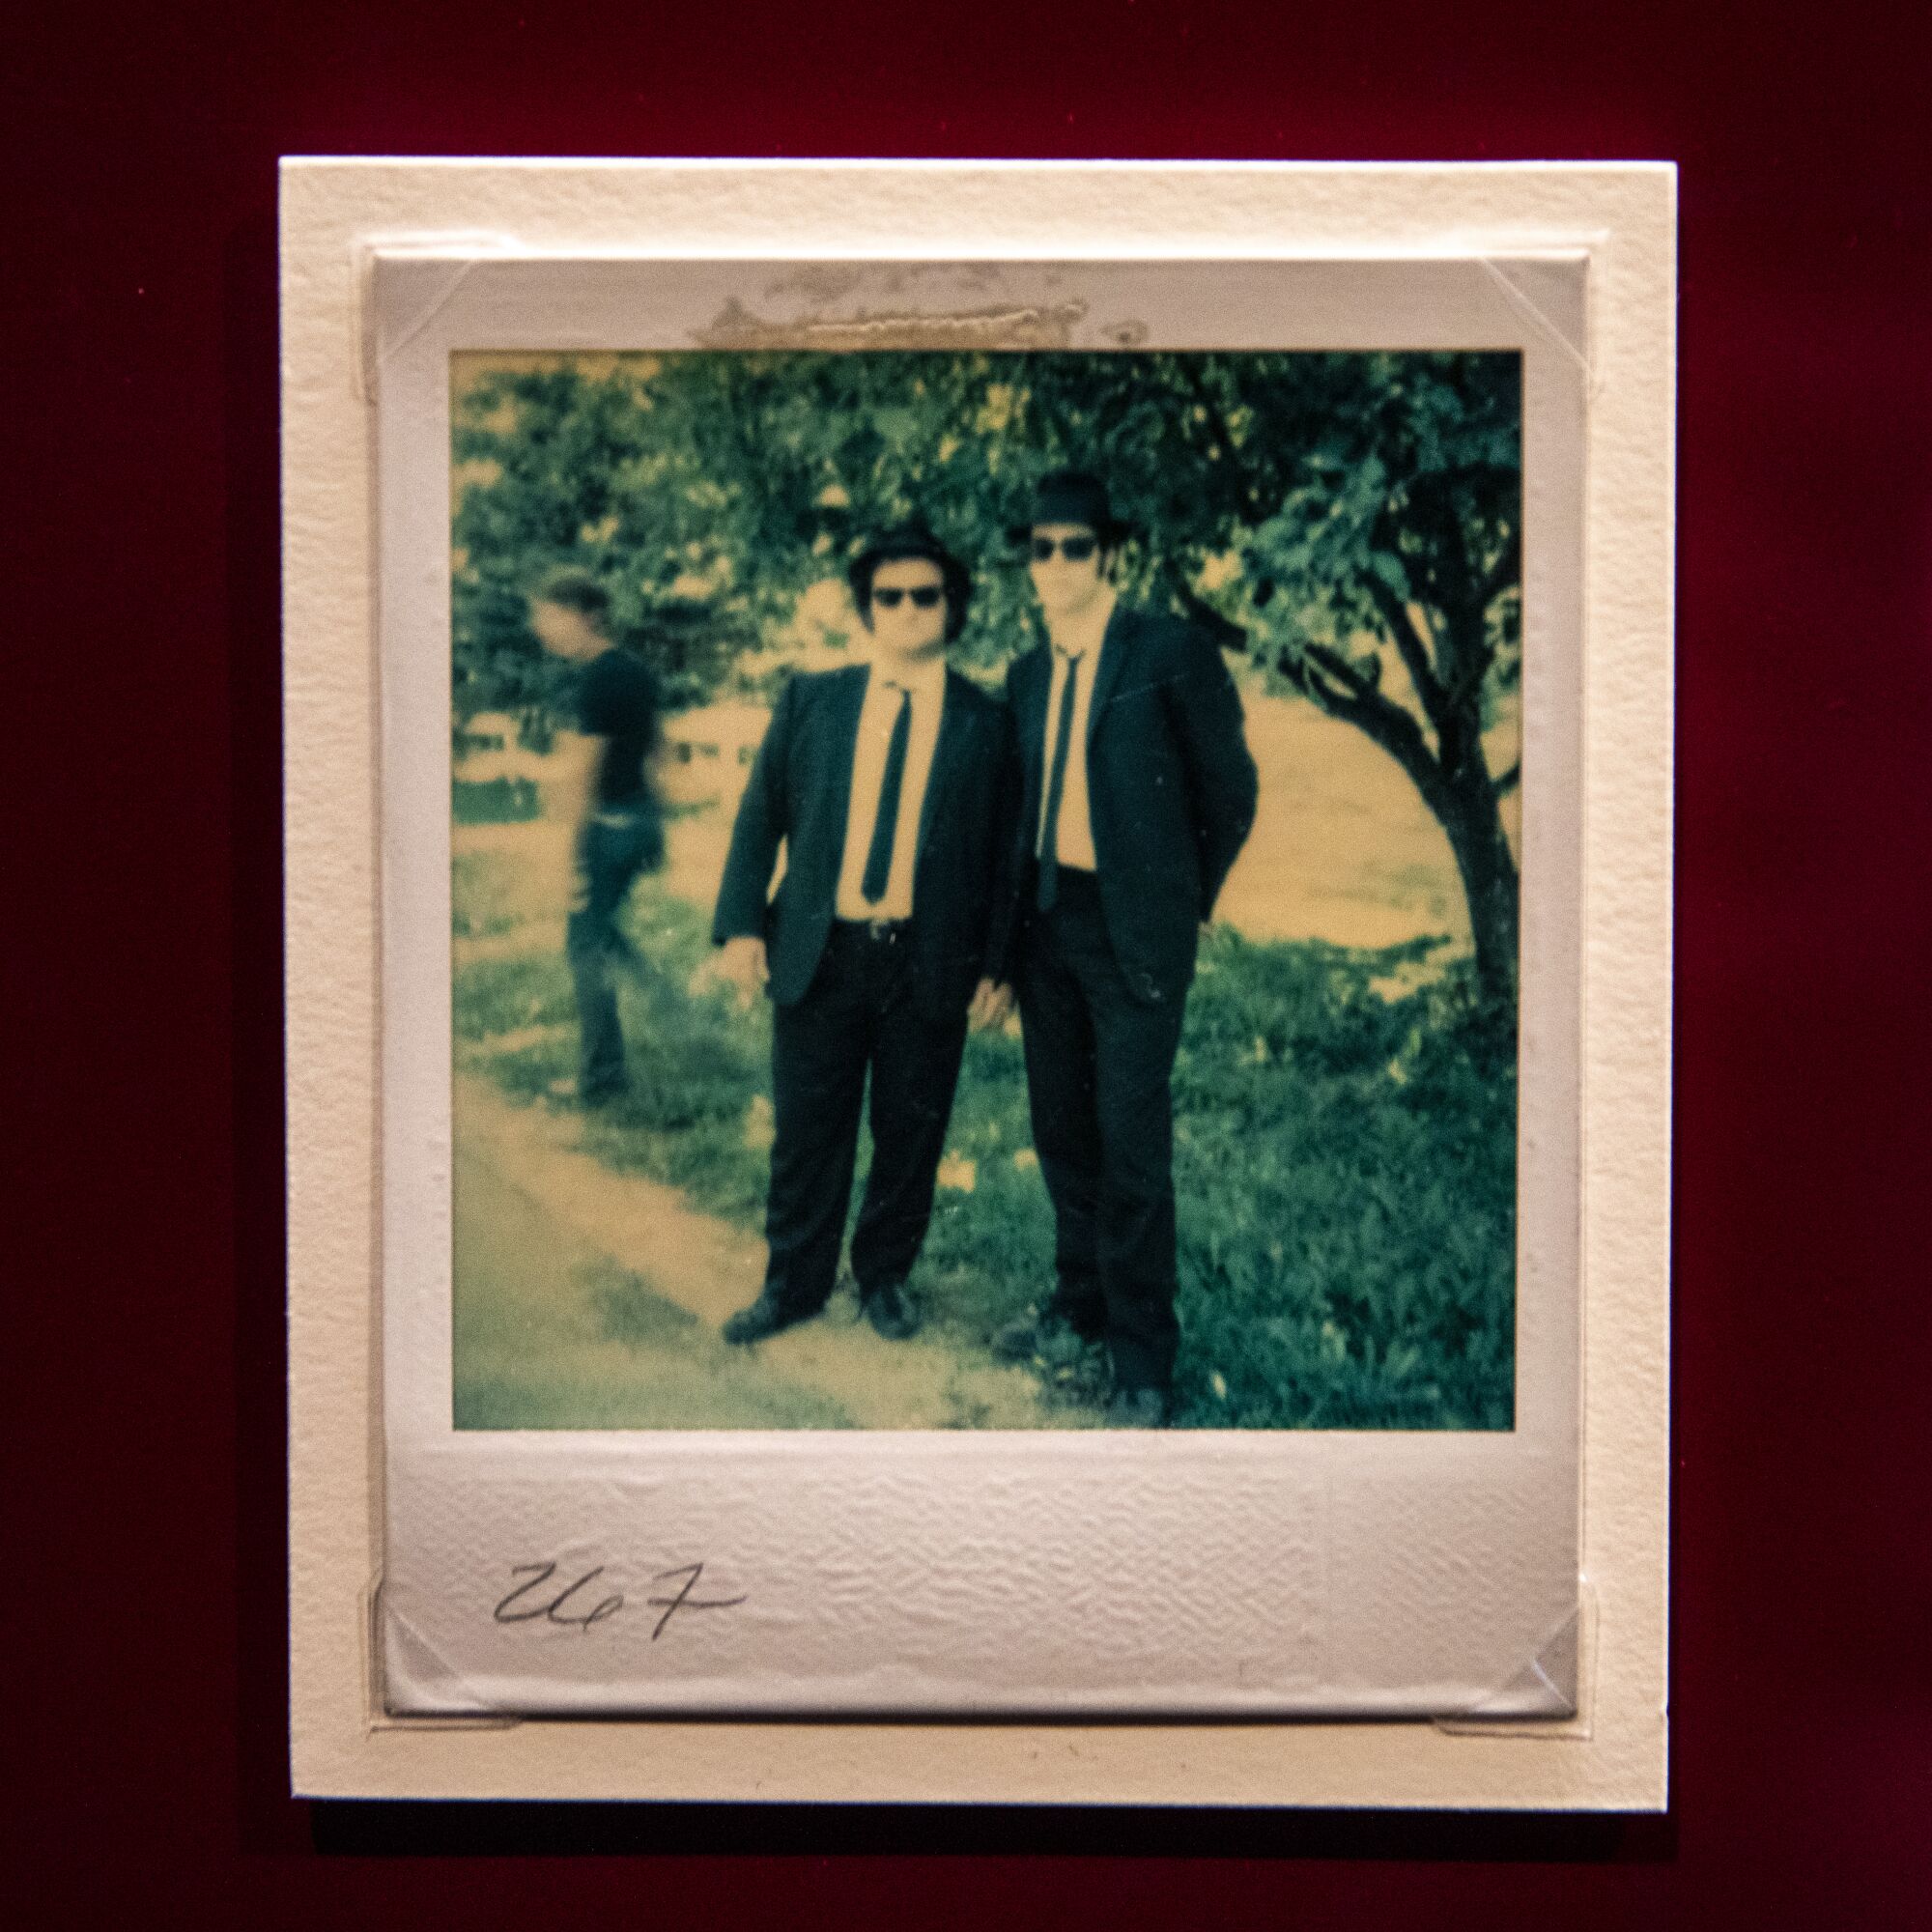 A Polaroid of two men wearing suits 